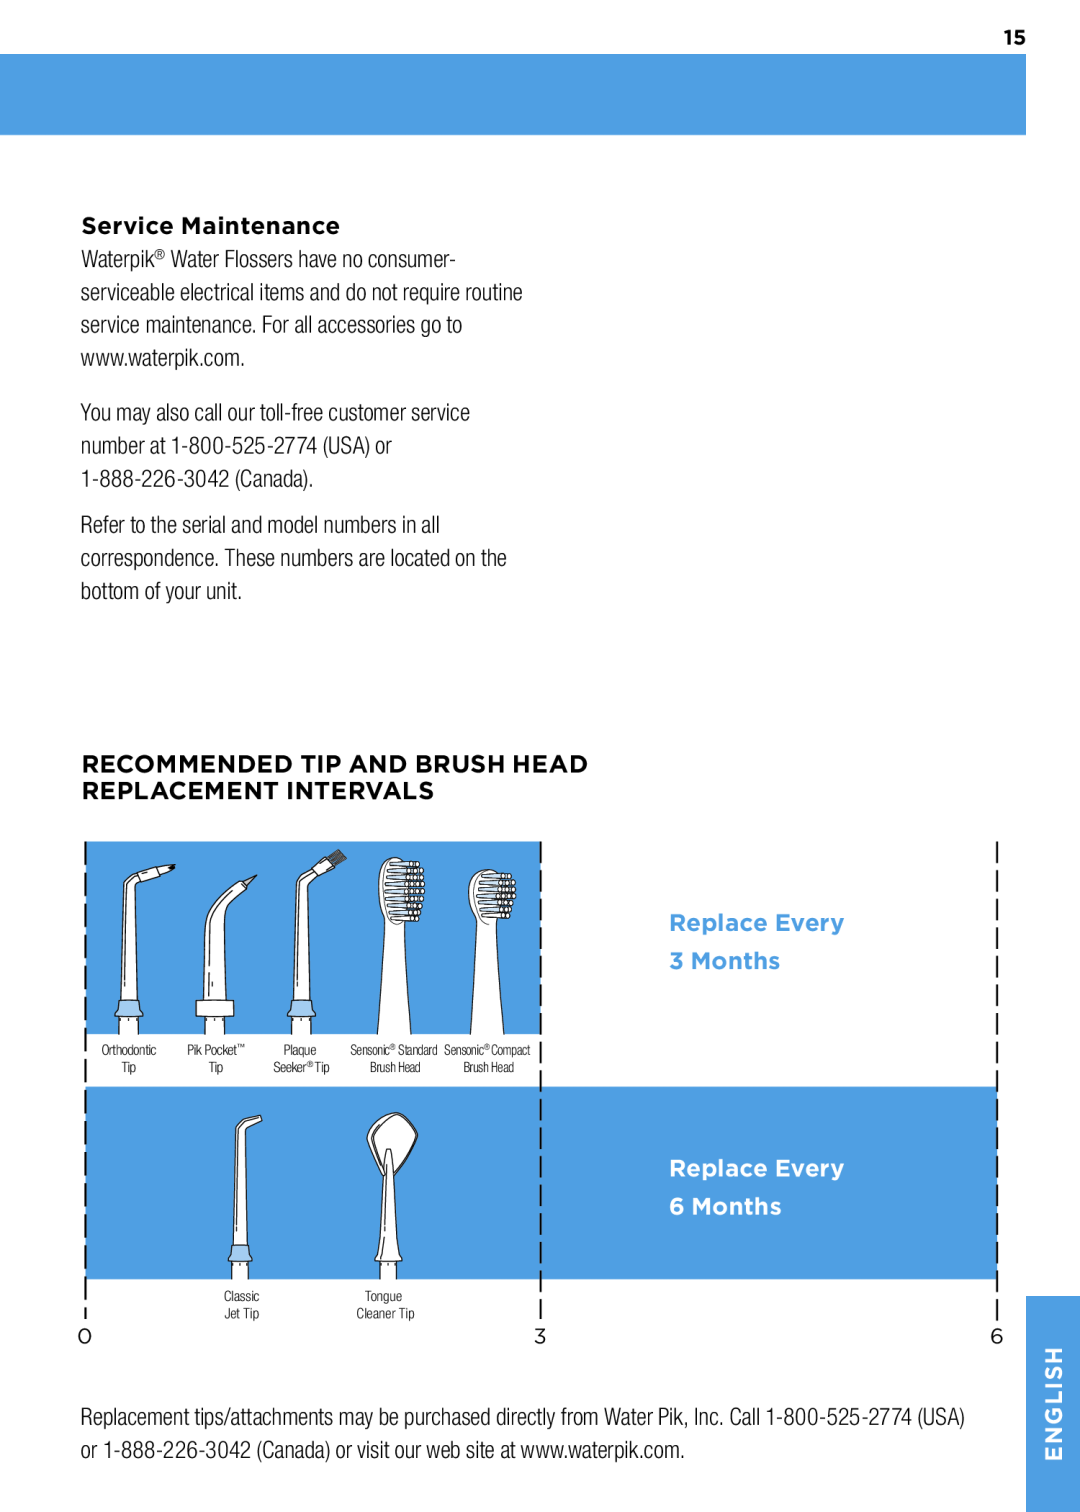 Waterpik Technologies wp-900 Service Maintenance, Recommended Tip And Brush Head Replacement Intervals, Replace Every 